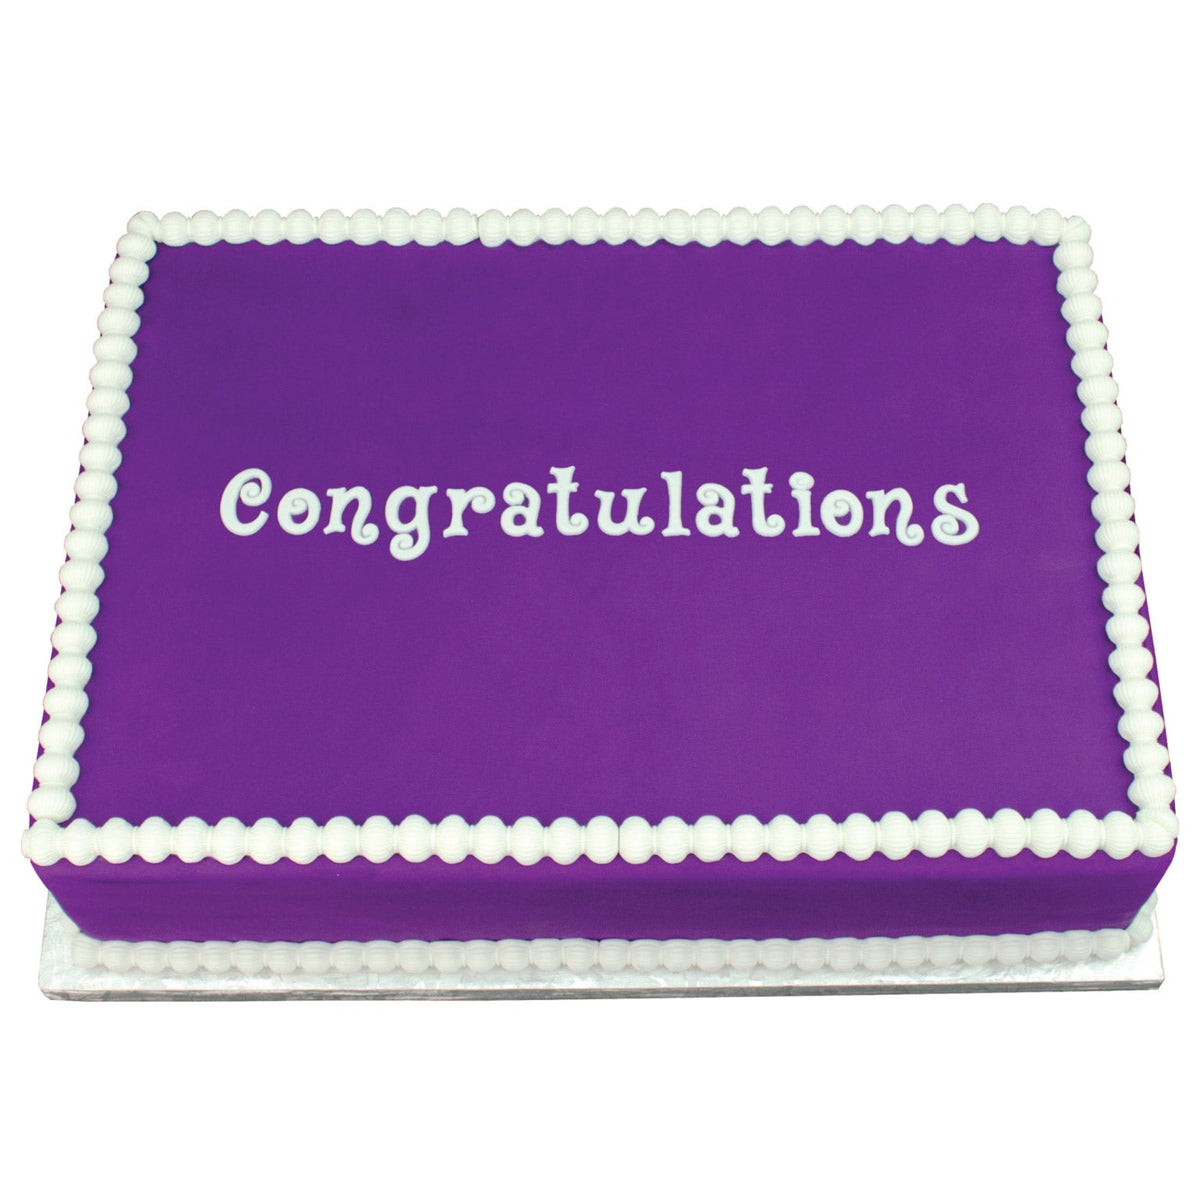 Decorated Cake using Swirly Congratulations Flexabet Food Safe Silicone Letter Maker by Marvelous Molds